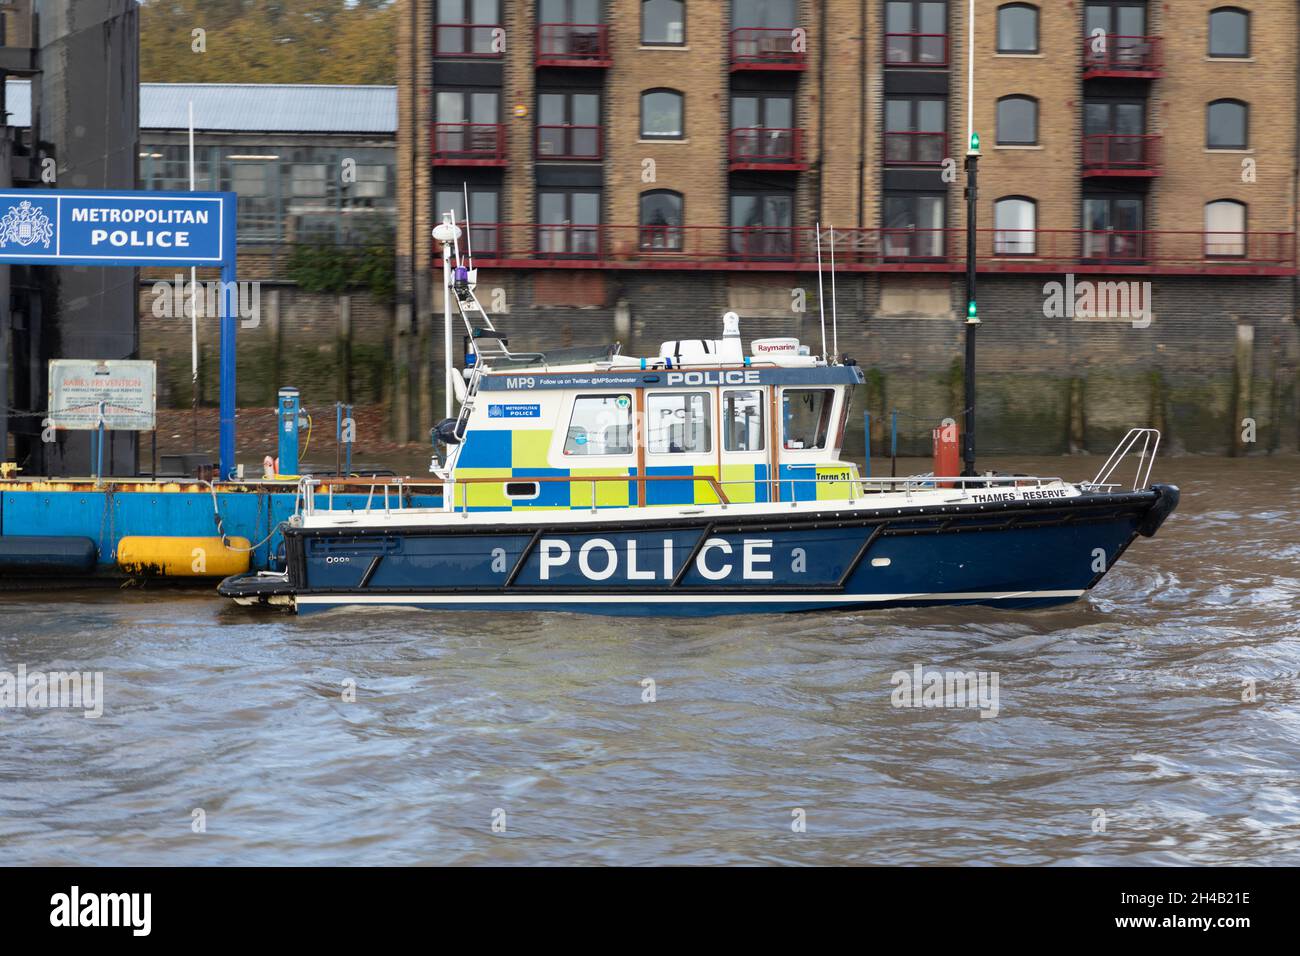 A Targa 31 boat belonging to the Metropolitan Police, moored on the River Thames in London, UK Stock Photo